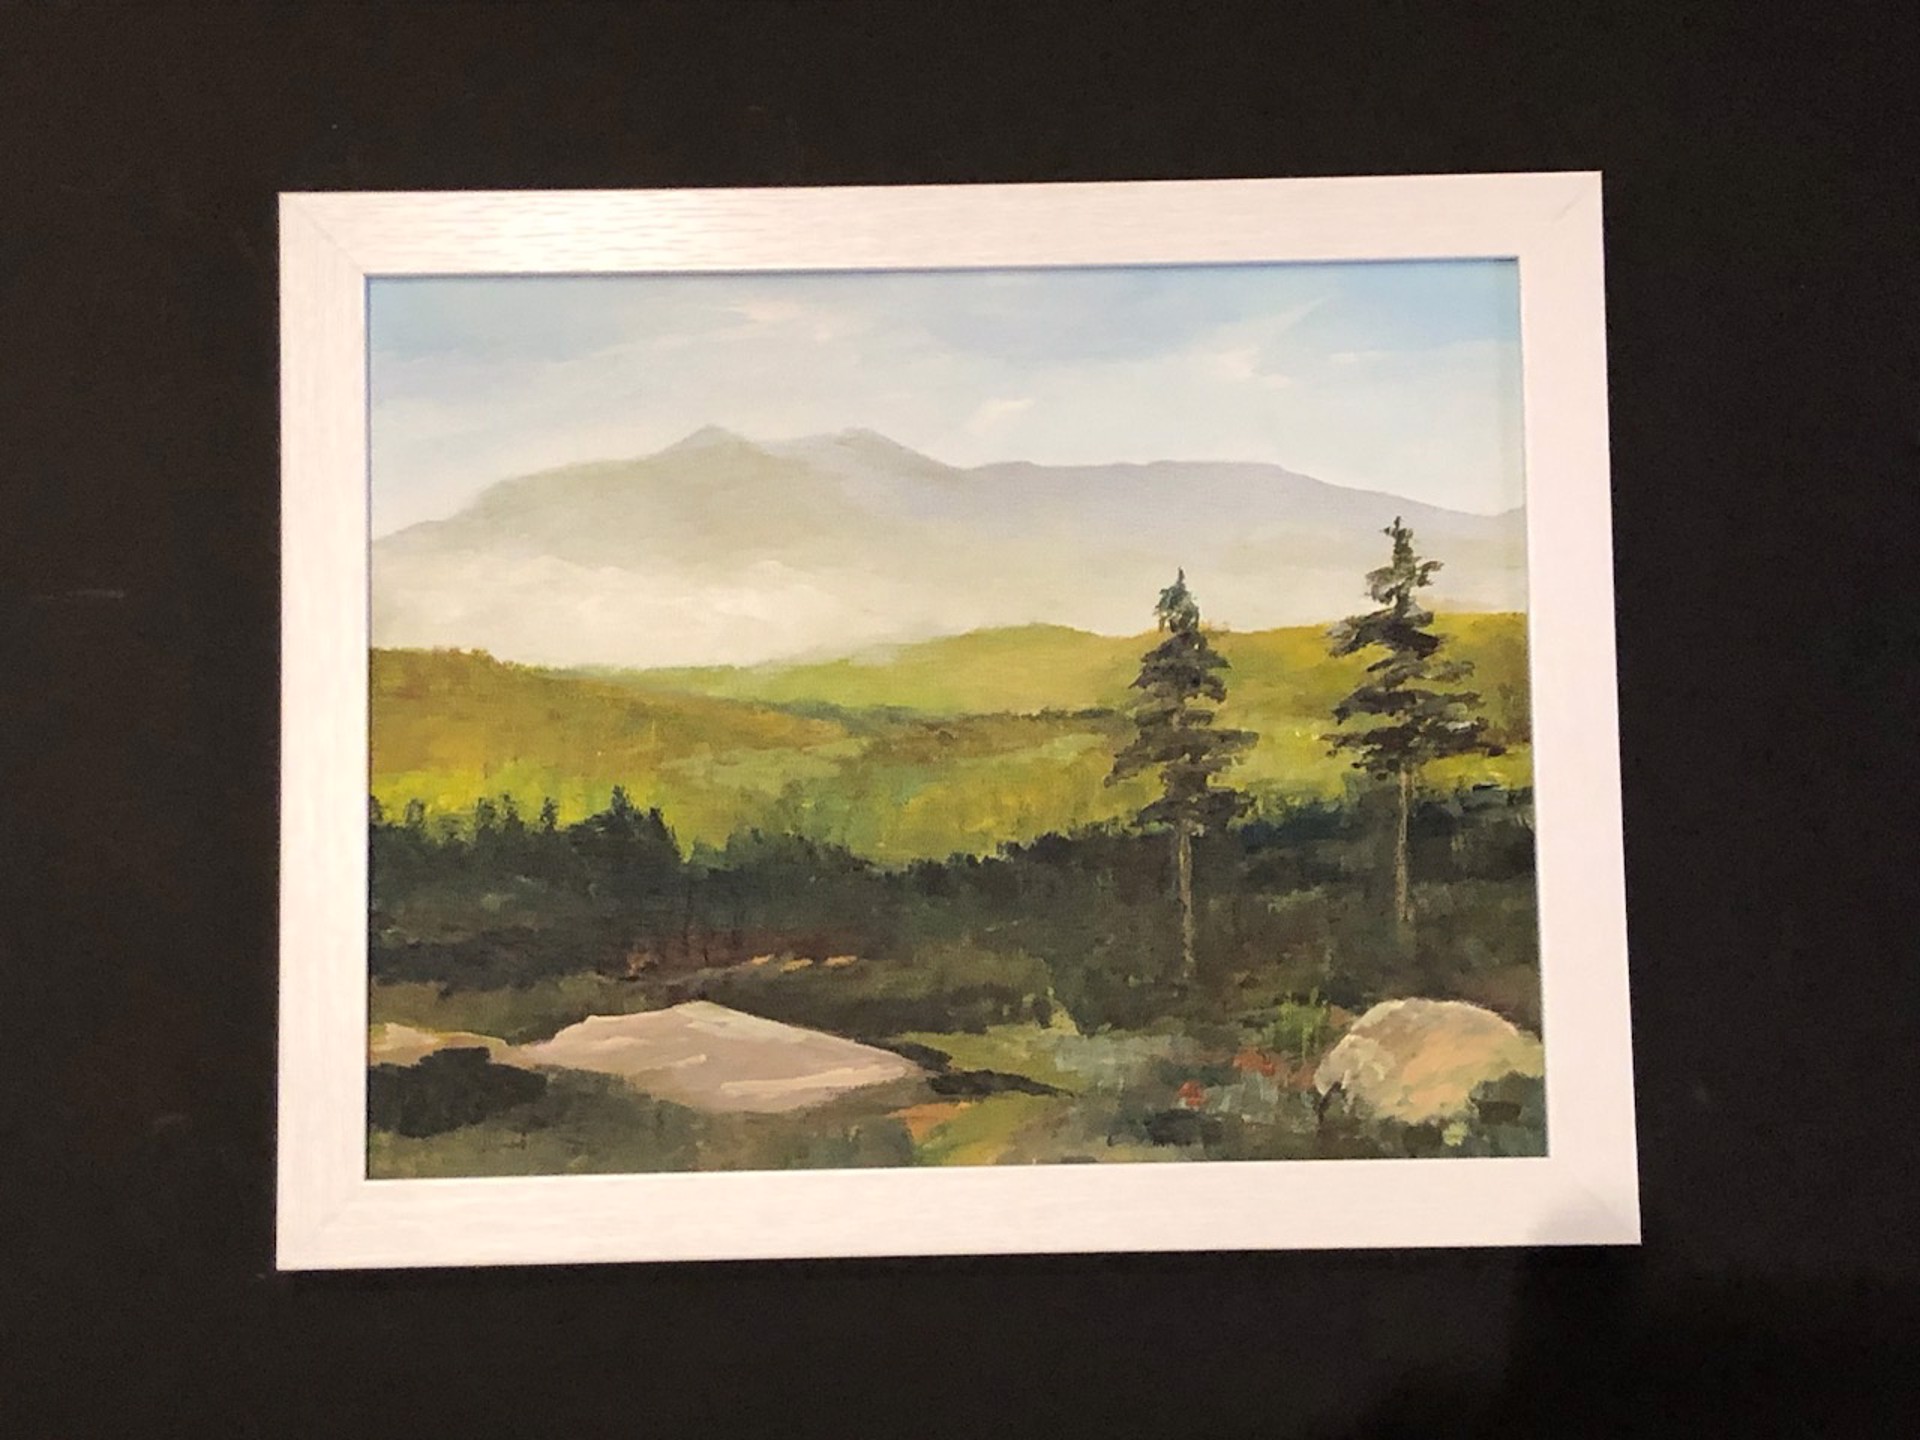 Katahdin From Woods and Water National Memorial by William Crosby